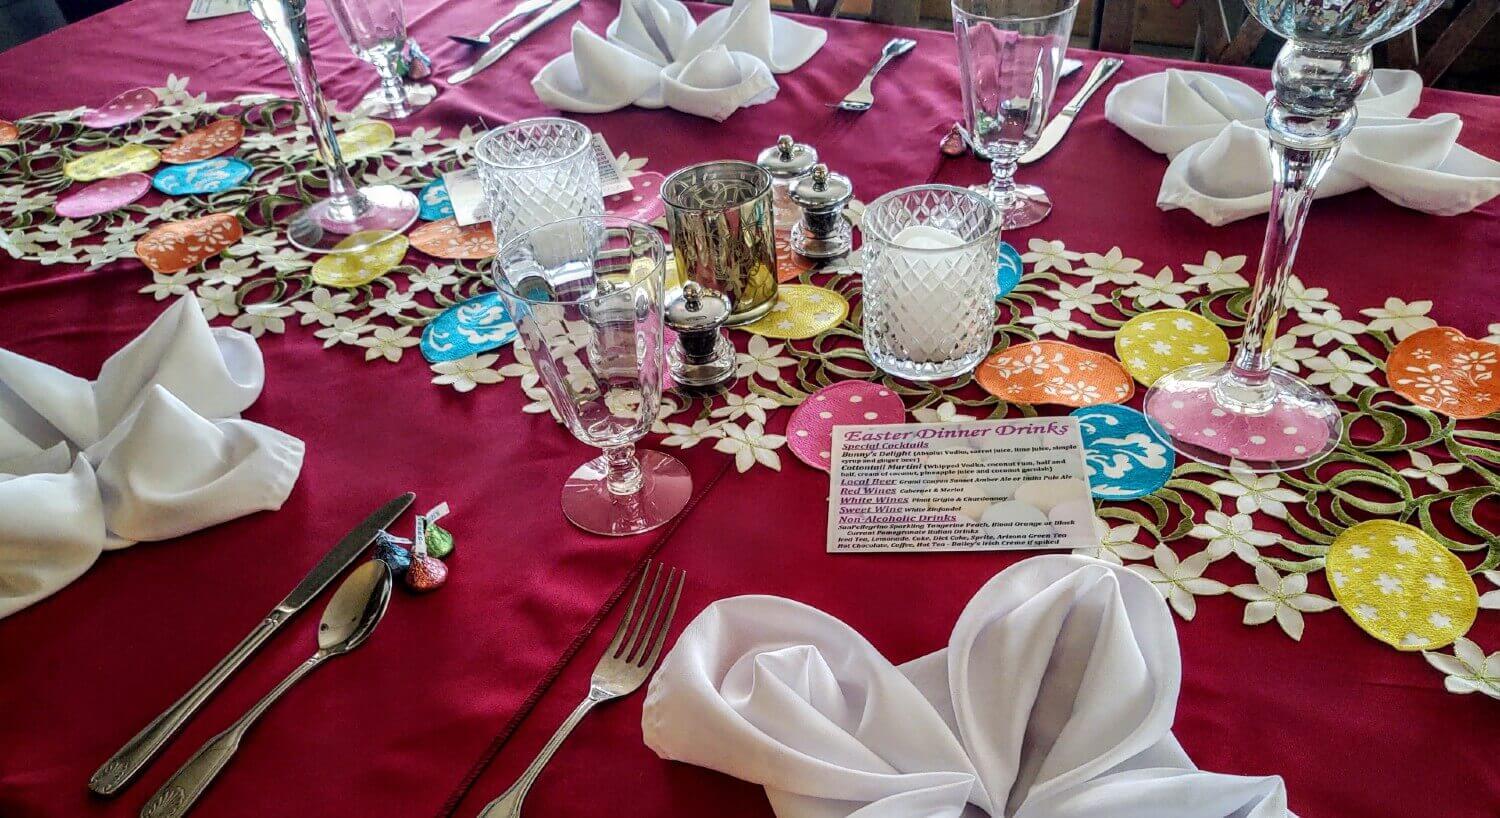 table with burgundy cloth and white linen napkins, table runner with felt easter eggs and recipe card for Easter dinner drinks